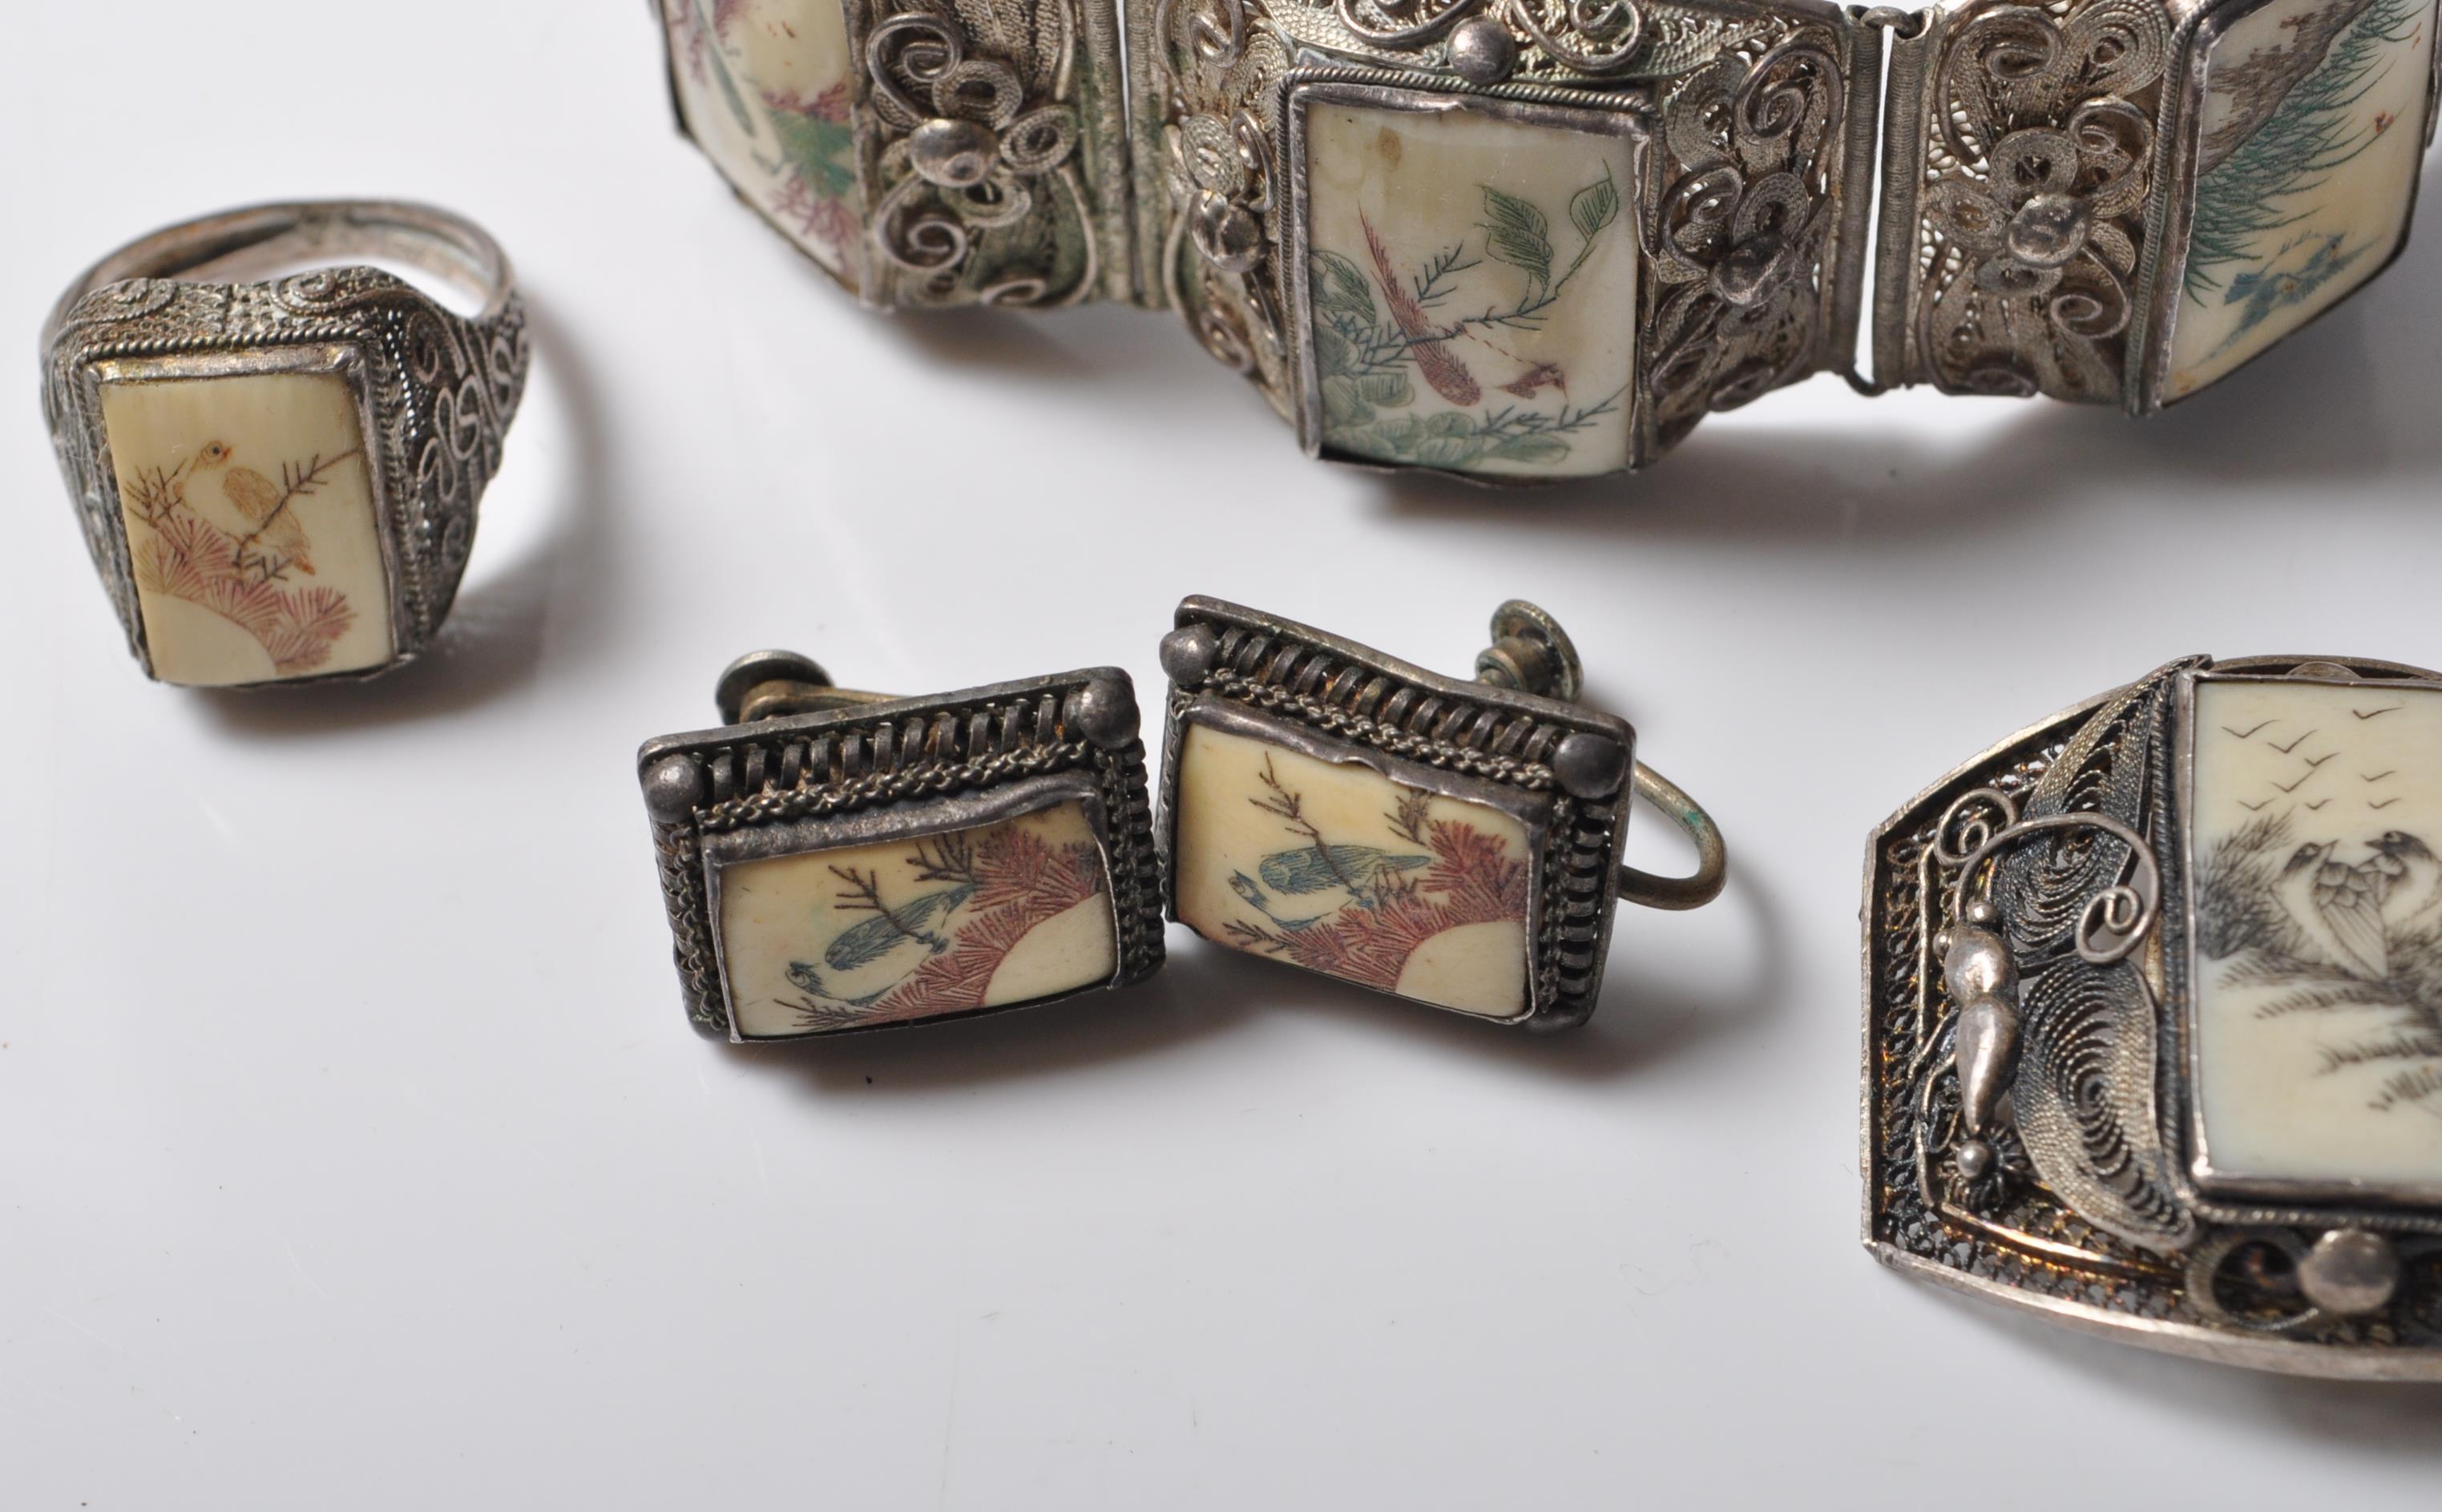 AN EARLY 20TH CENTURY CHINESE SILVER FILIGREE JEWLLERY SET - Image 3 of 6